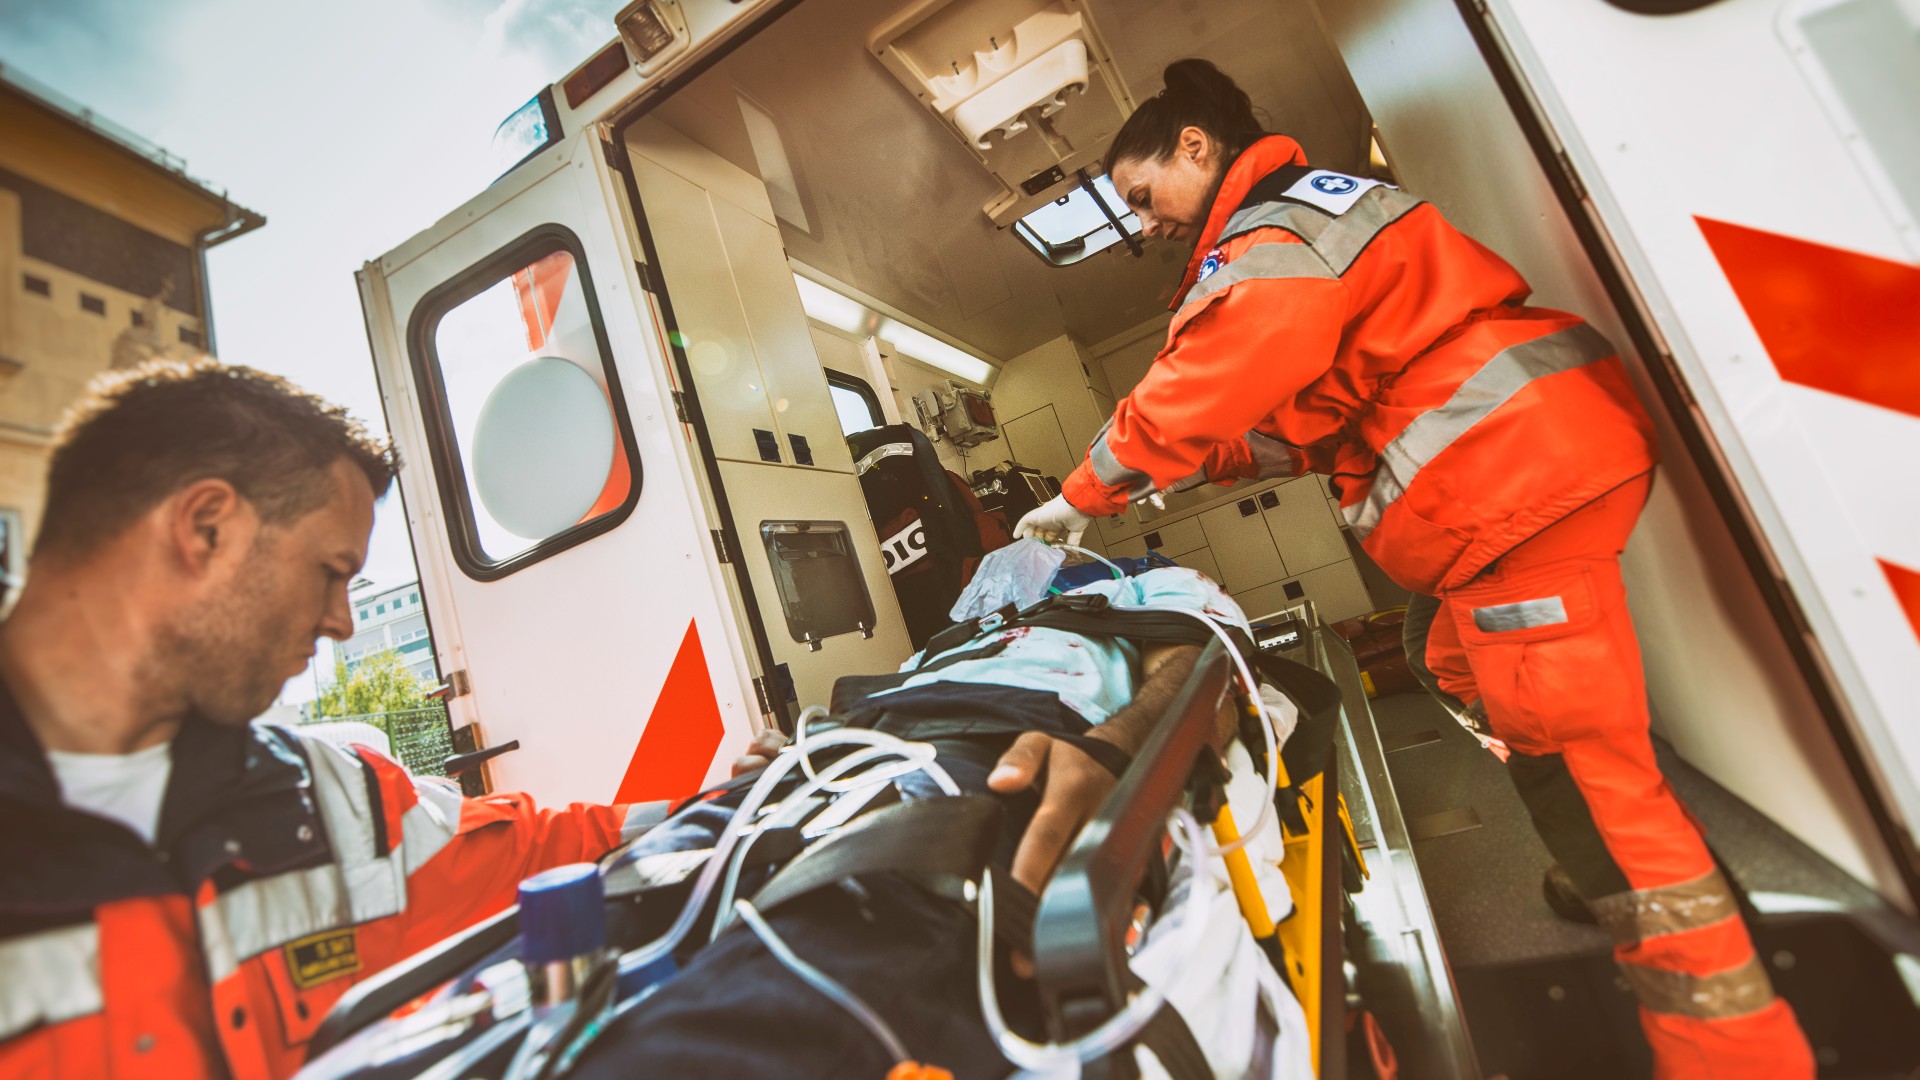 Two EMT workers loading a patient into an ambulance